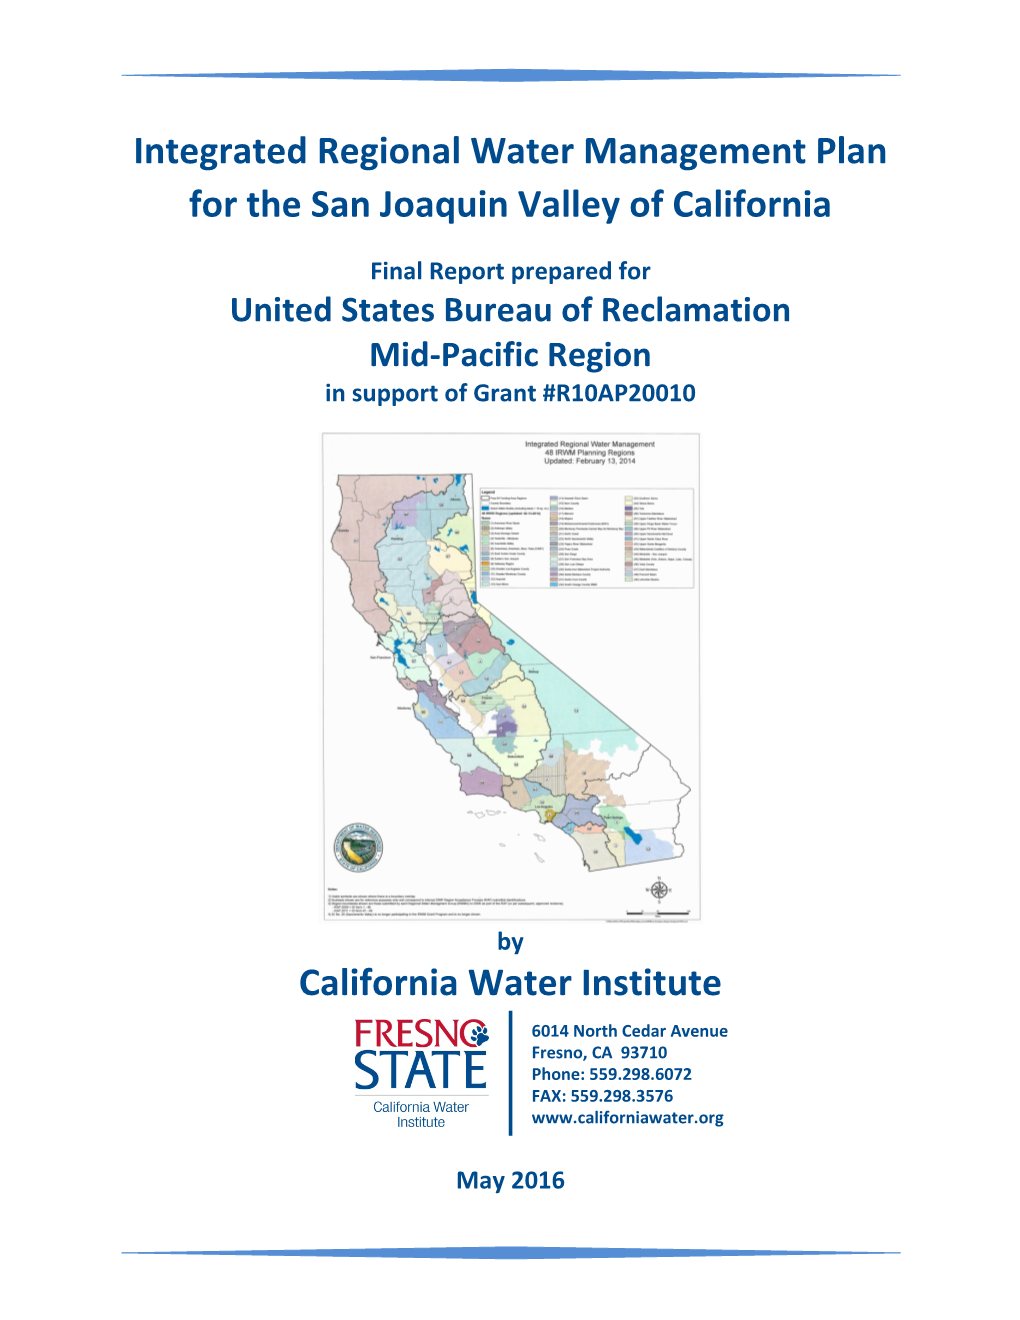 Integrated Regional Water Management Plan for the San Joaquin Valley of California